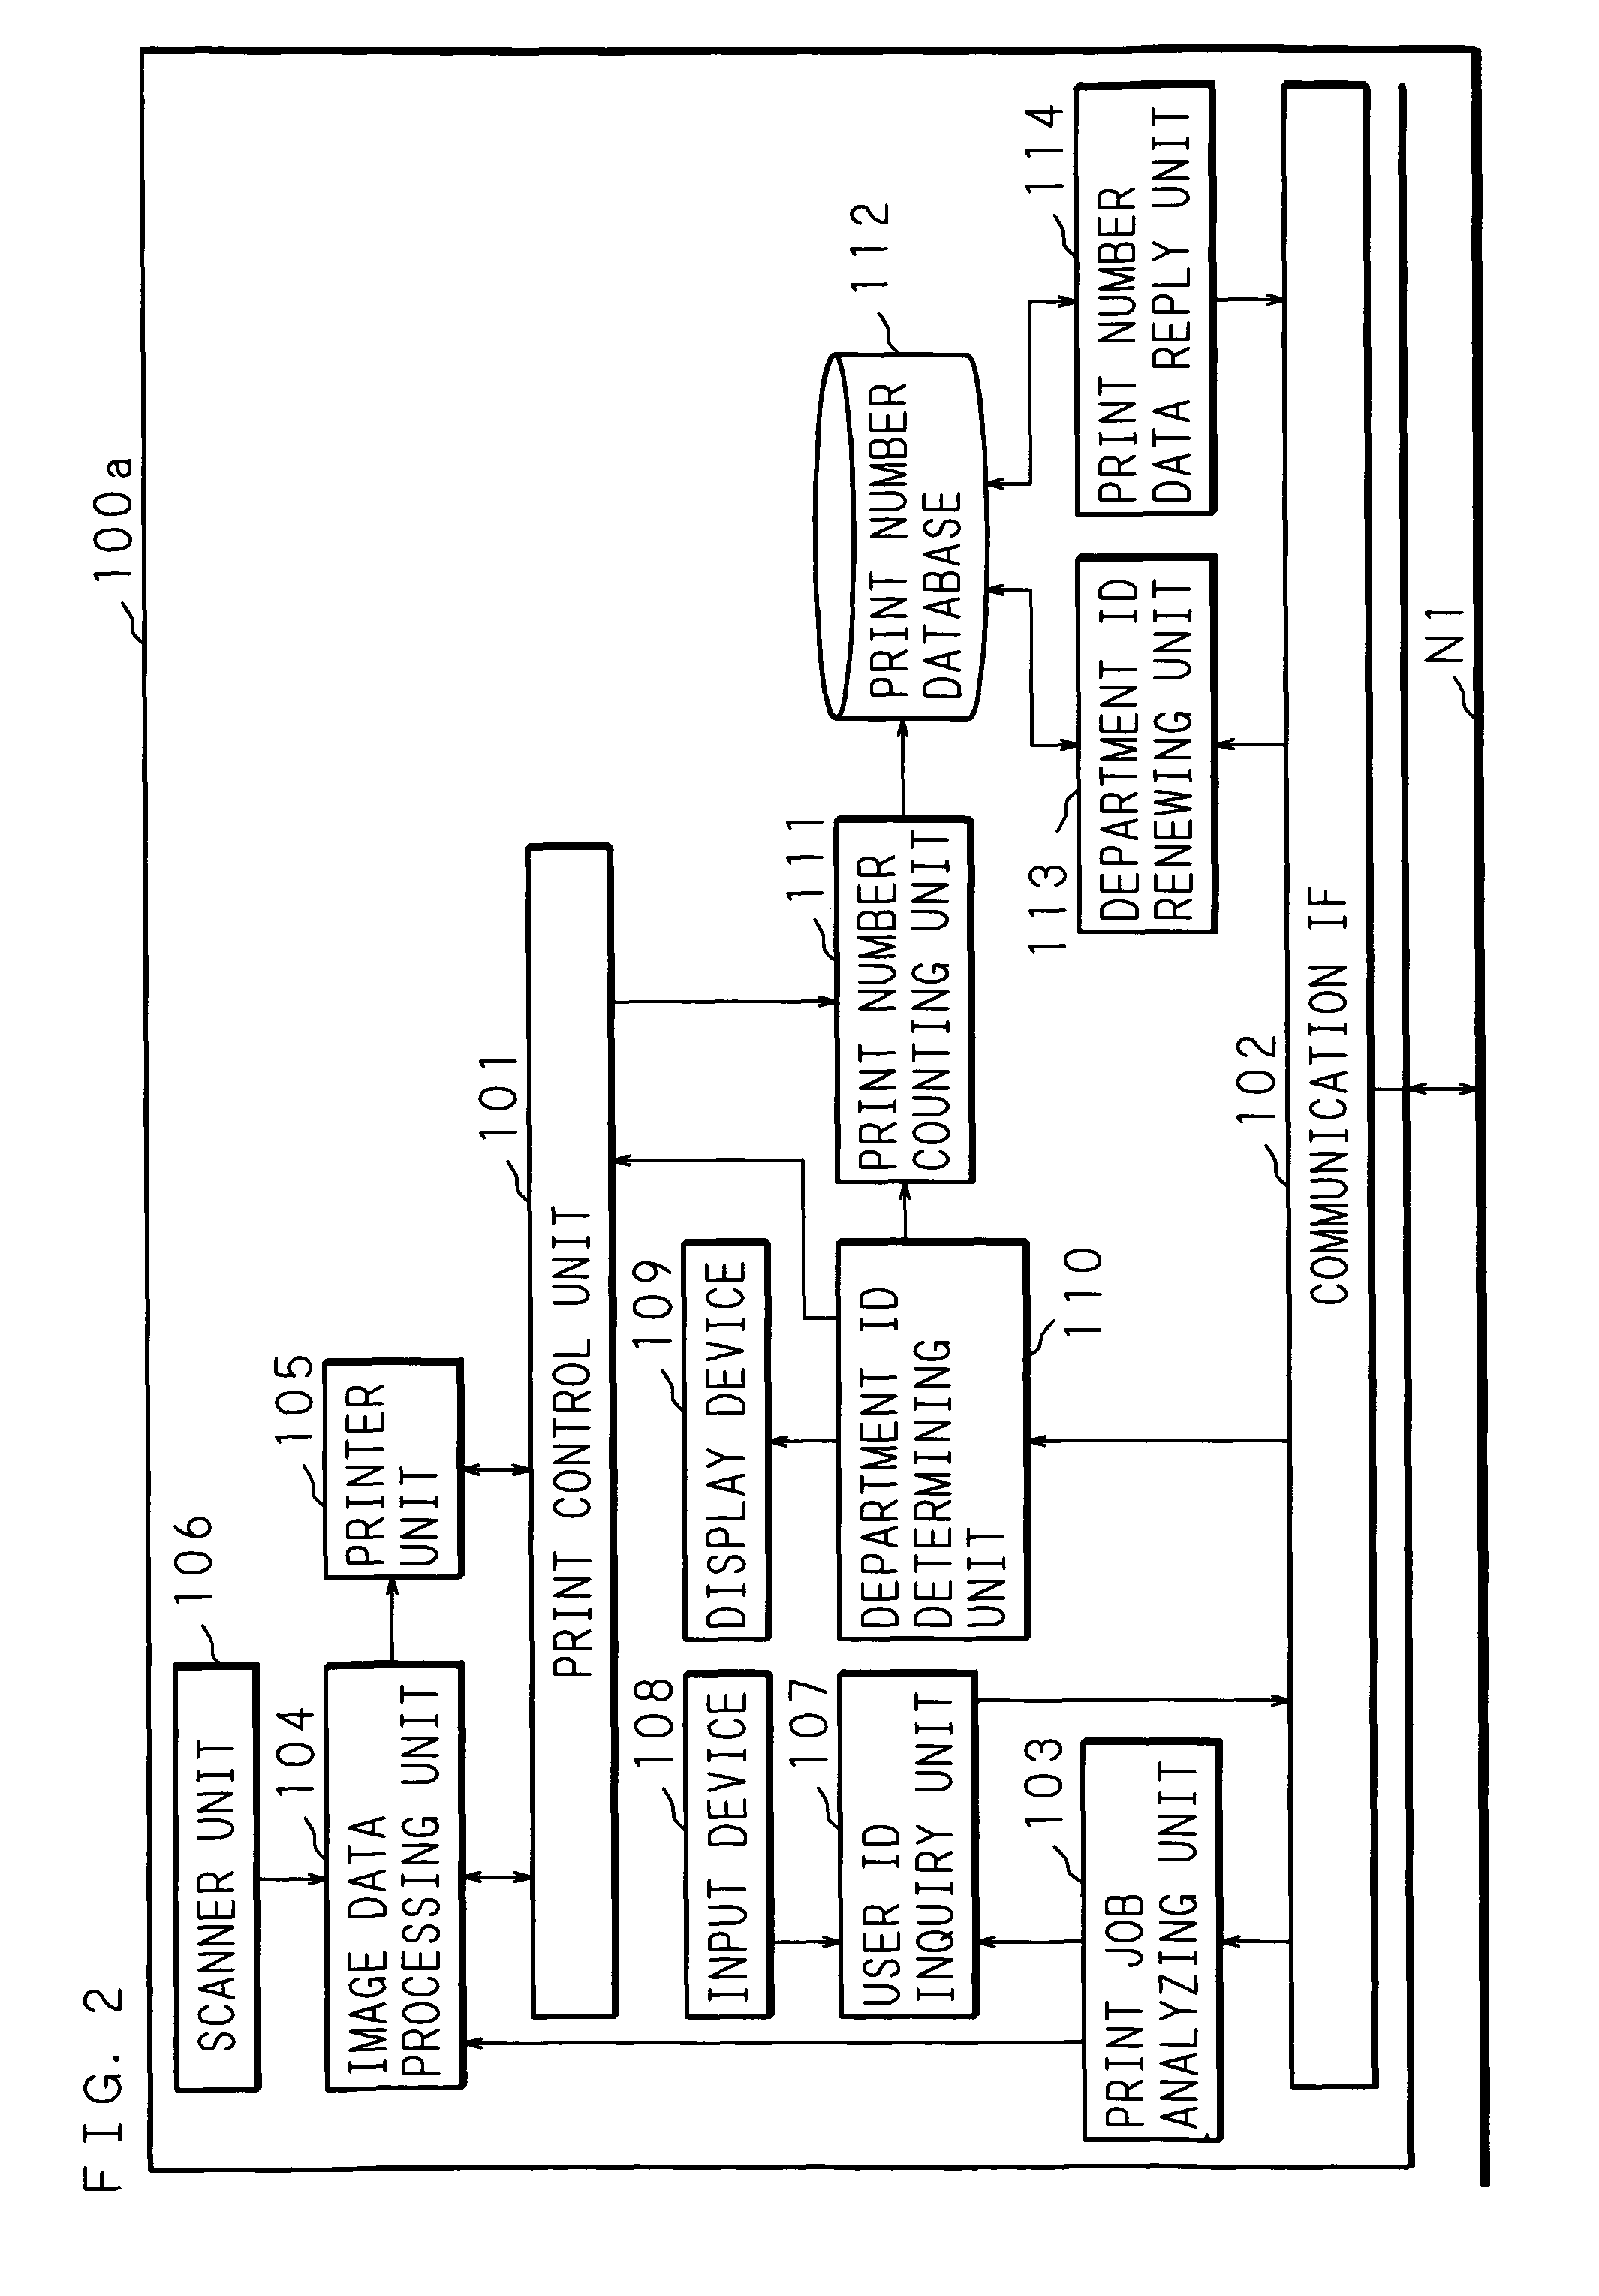 Image forming system with user authentication correlating user to department for accounting purposes